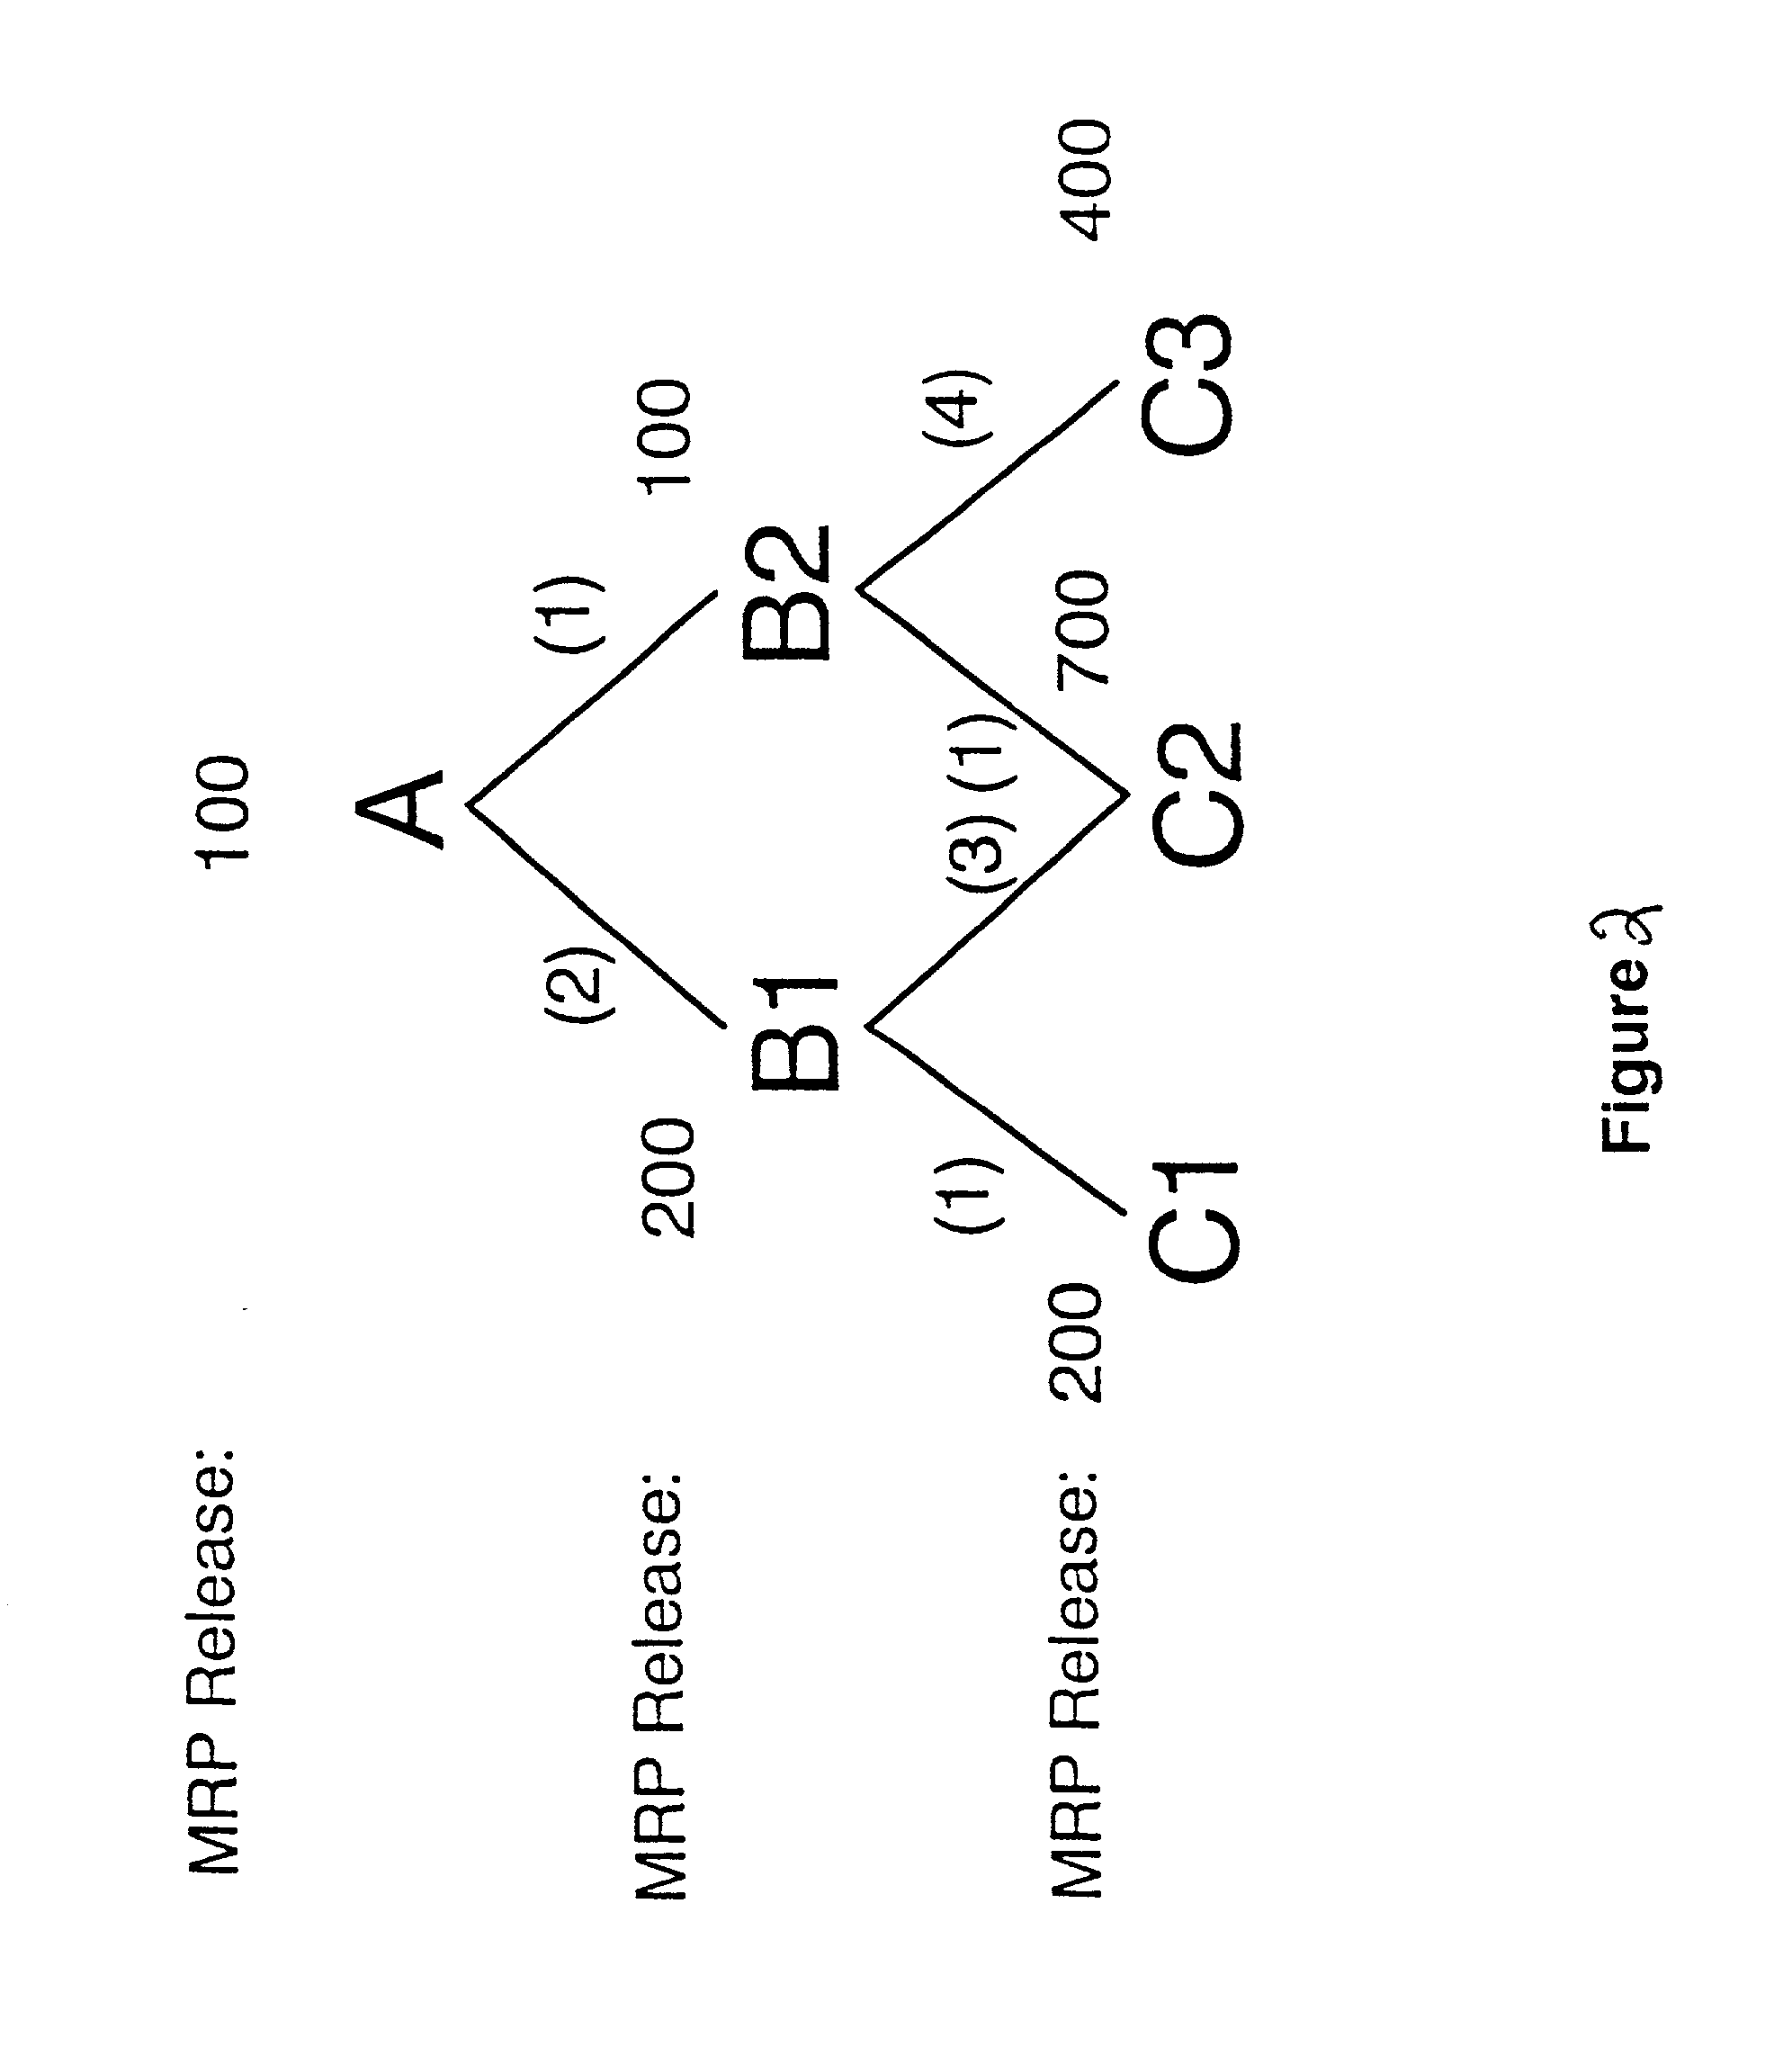 Method for allocating limited component supply and capacity to optimize production scheduling